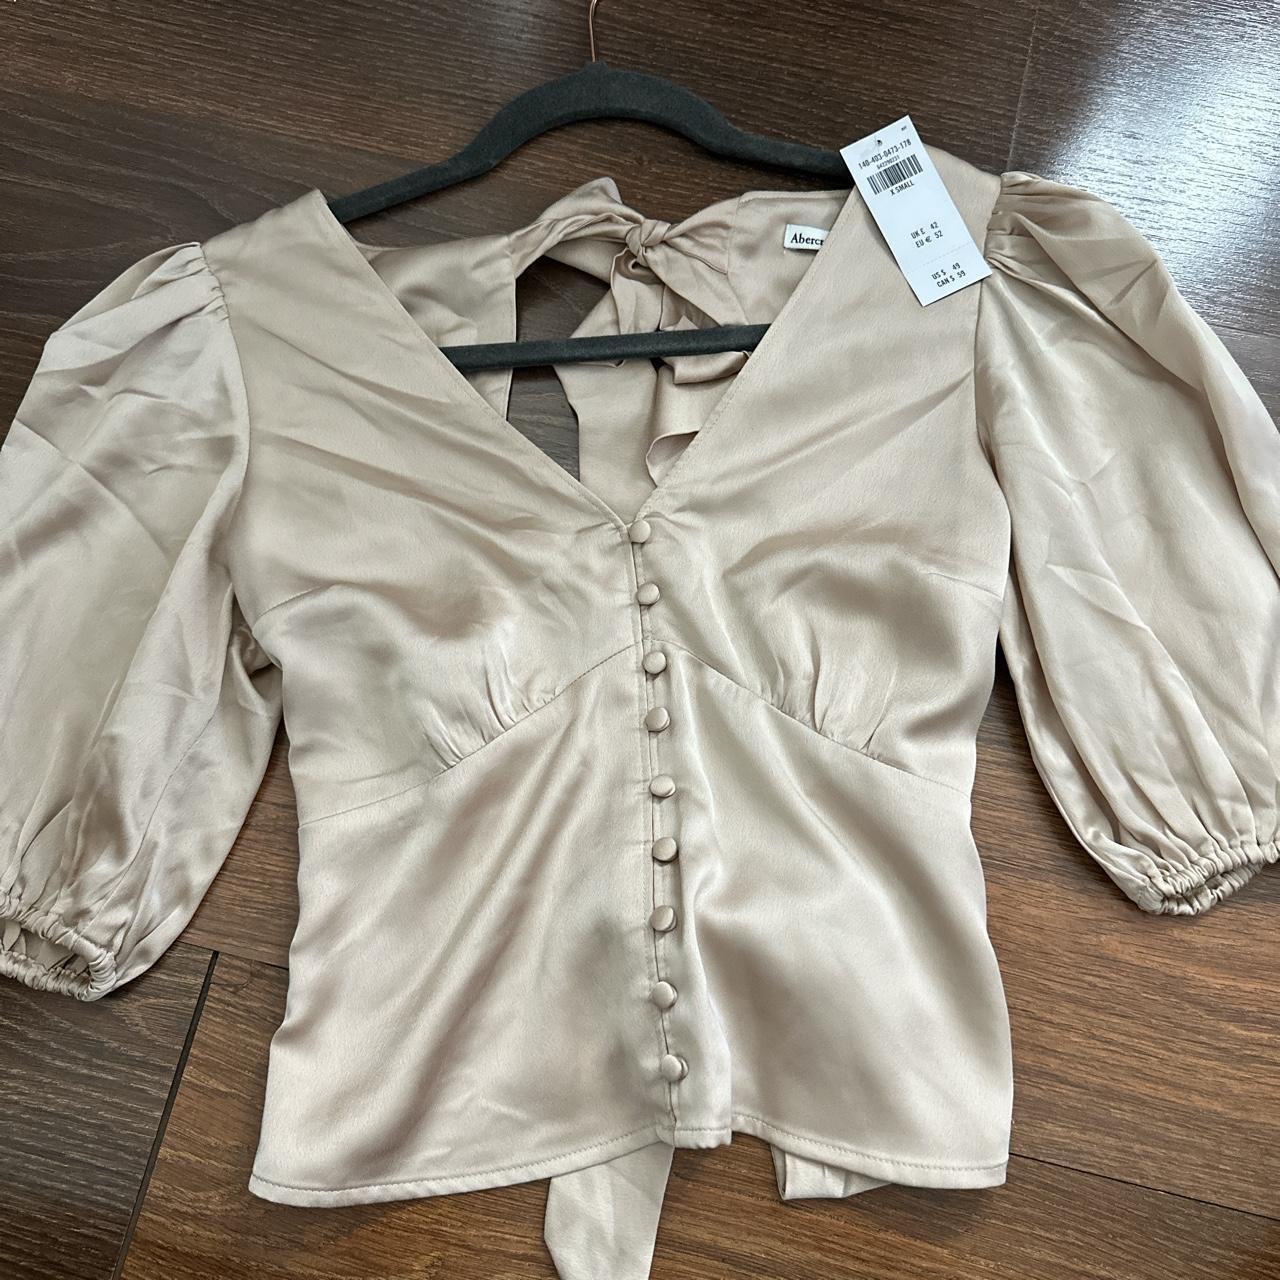 Abercrombie satin top in champagne color with open... - Depop